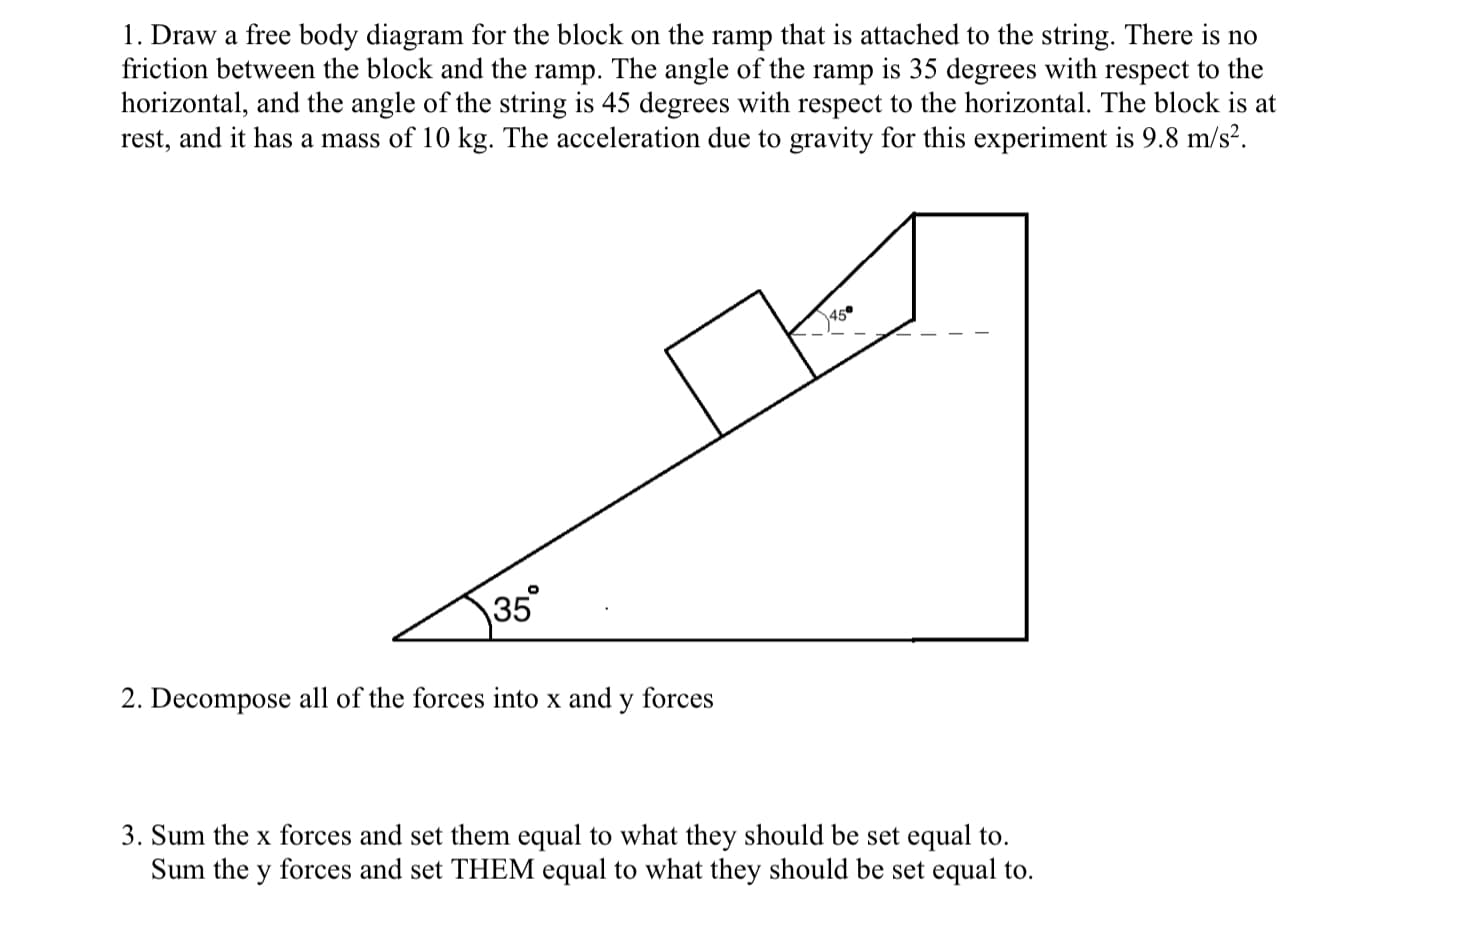 1. Draw a free body diagram for the block on the ramp that is attached to the string. There is no
friction between the block and the ramp. The angle of the ramp is 35 degrees with respect to the
horizontal, and the angle of the string is 45 degrees with respect to the horizontal. The block is at
rest, and it has a mass of 10 kg. The acceleration due to gravity for this experiment is 9.8 m/s?.
450
35°
2. Decompose all of the forces into x and y forces
3. Sum the x forces and set them equal to what they should be set equal to.
Sum the y forces and set THEM equal to what they should be set equal to.
